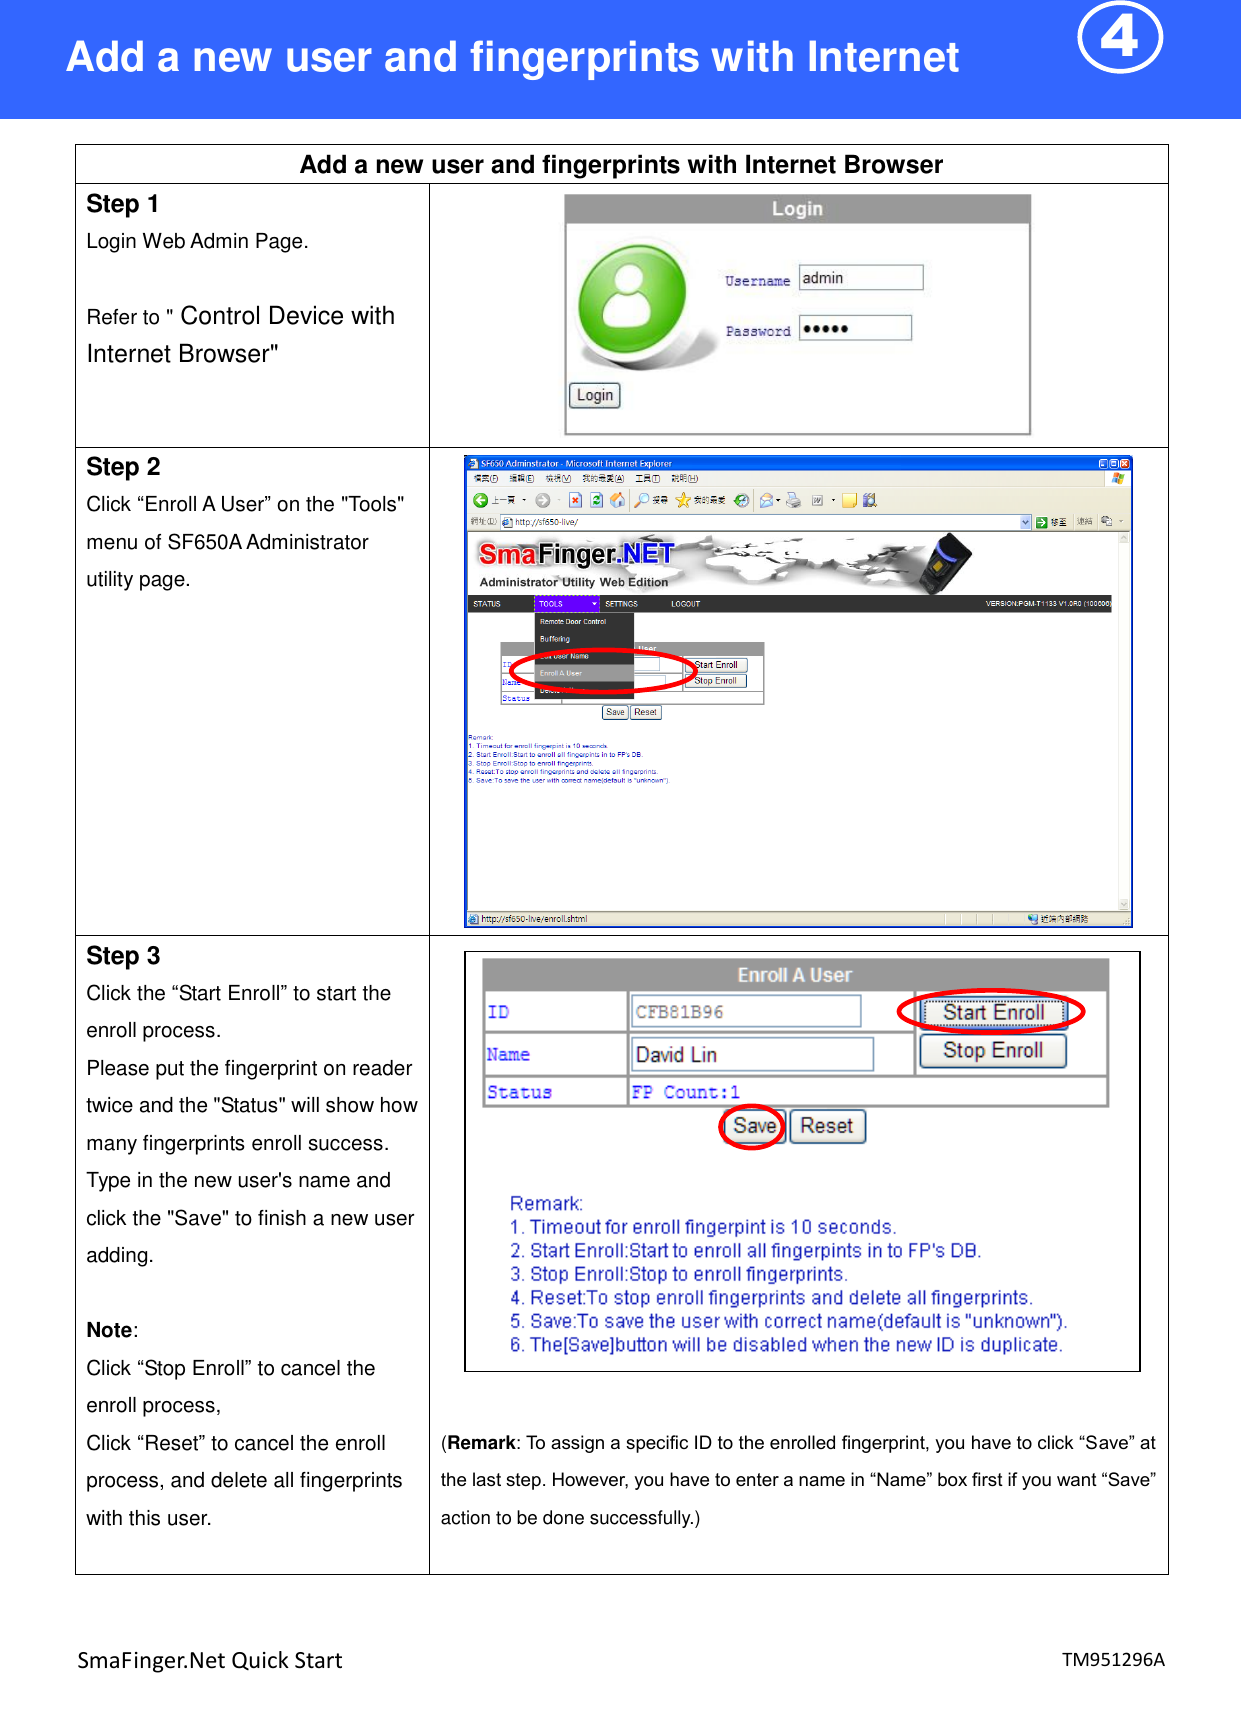 4  TM951296A SmaFinger.Net Quick Start  Add a new user and fingerprints with Internet Browser Step 1 Login Web Admin Page.  Refer to &quot; Control Device with Internet Browser&quot;  Step 2 Click “Enroll A User” on the &quot;Tools&quot; menu of SF650A Administrator utility page.   Step 3 Click the “Start Enroll” to start the enroll process. Please put the fingerprint on reader twice and the &quot;Status&quot; will show how many fingerprints enroll success.   Type in the new user&apos;s name and click the &quot;Save&quot; to finish a new user adding.    Note: Click “Stop Enroll” to cancel the enroll process, Click “Reset” to cancel the enroll process, and delete all fingerprints with this user.     (Remark: To assign a specific ID to the enrolled fingerprint, you have to click “Save” at the last step. However, you have to enter a name in “Name” box first if you want “Save” action to be done successfully.)   Add a new user and fingerprints with Internet Browser 